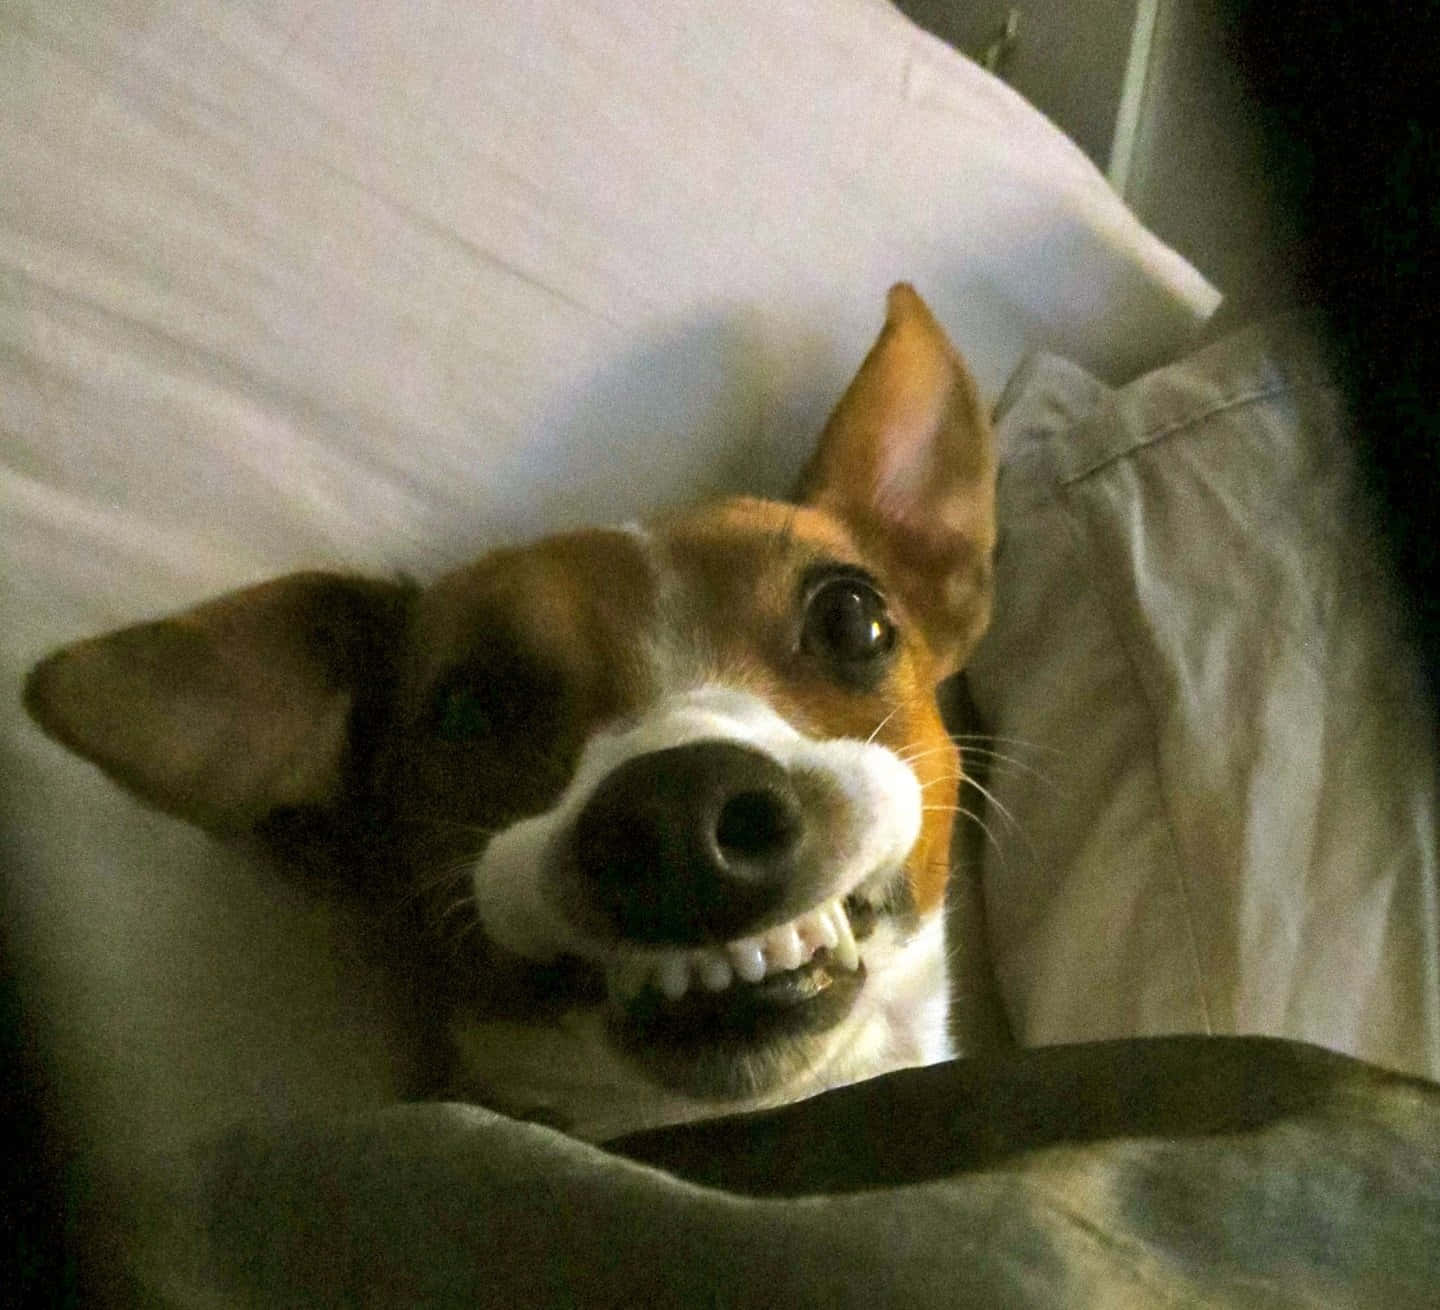 A Dog Is Laying In Bed With Its Mouth Open